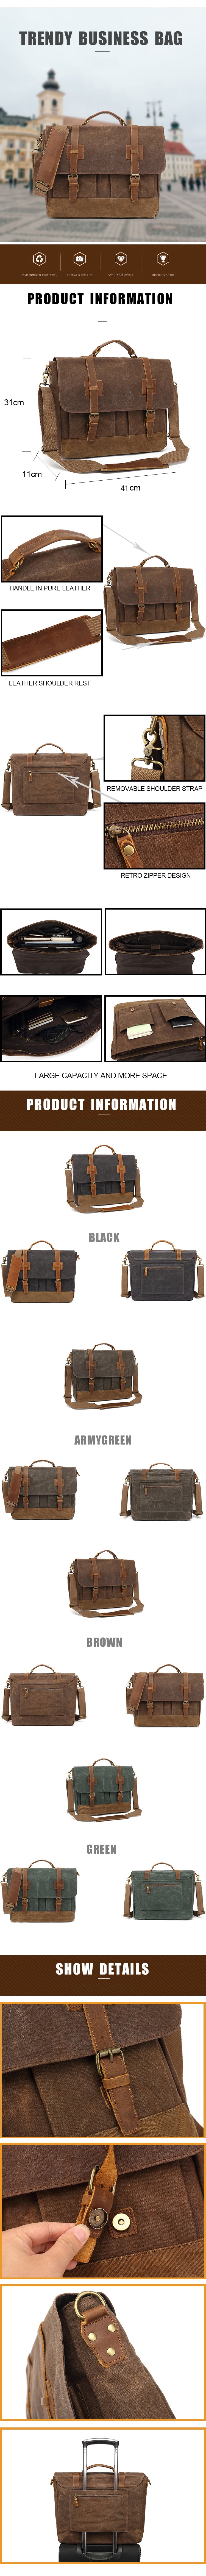 PRODUCT DISPLAY AND DETAIL of Woosir Canvas Business Briefcase